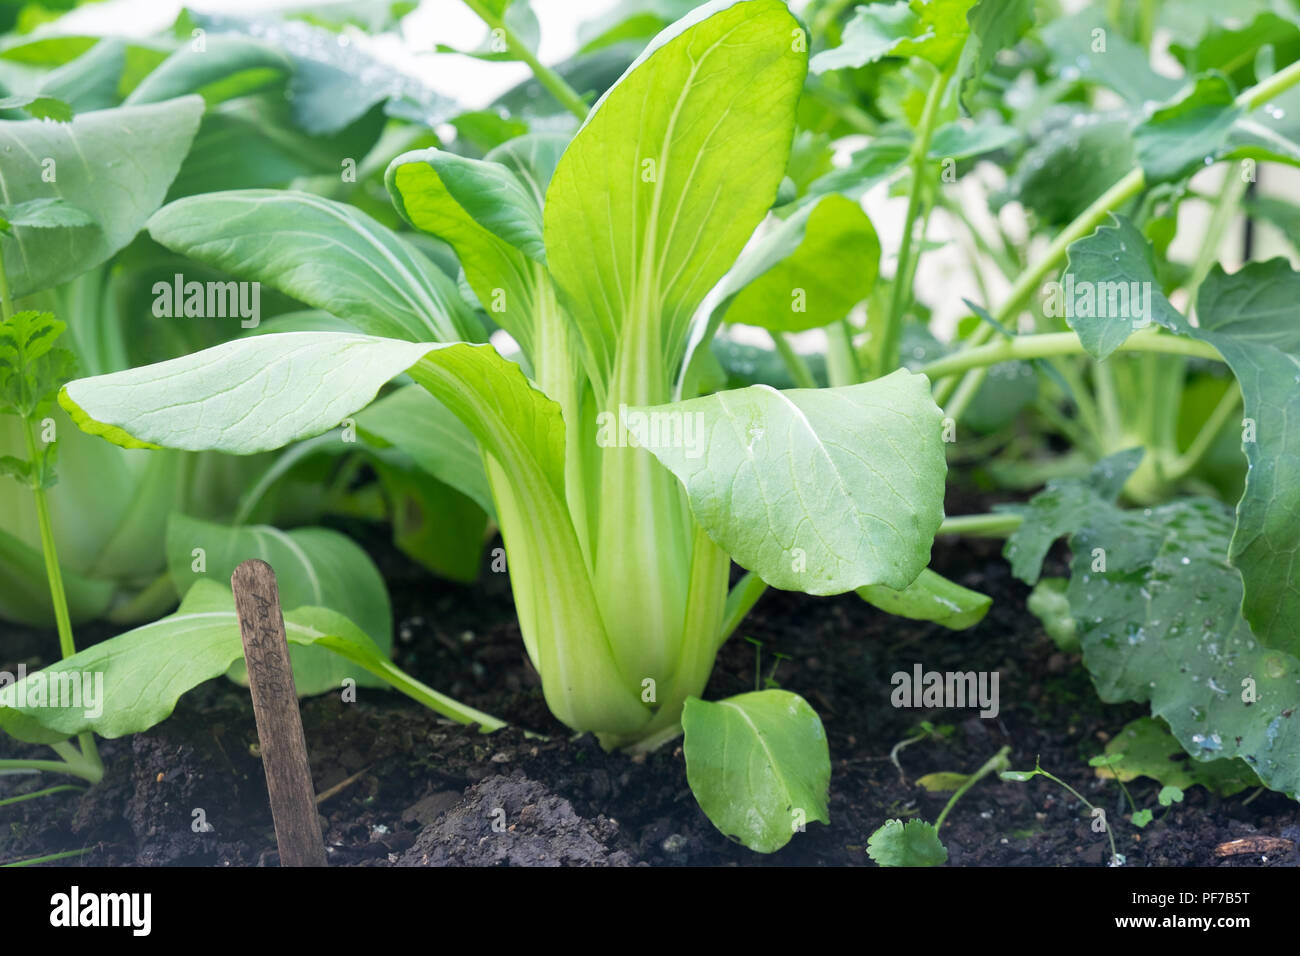 Bok choy - also known as pak choi, pok choi or Chinese cabbage - growing in Brassica patch of garden bed in soil Stock Photo